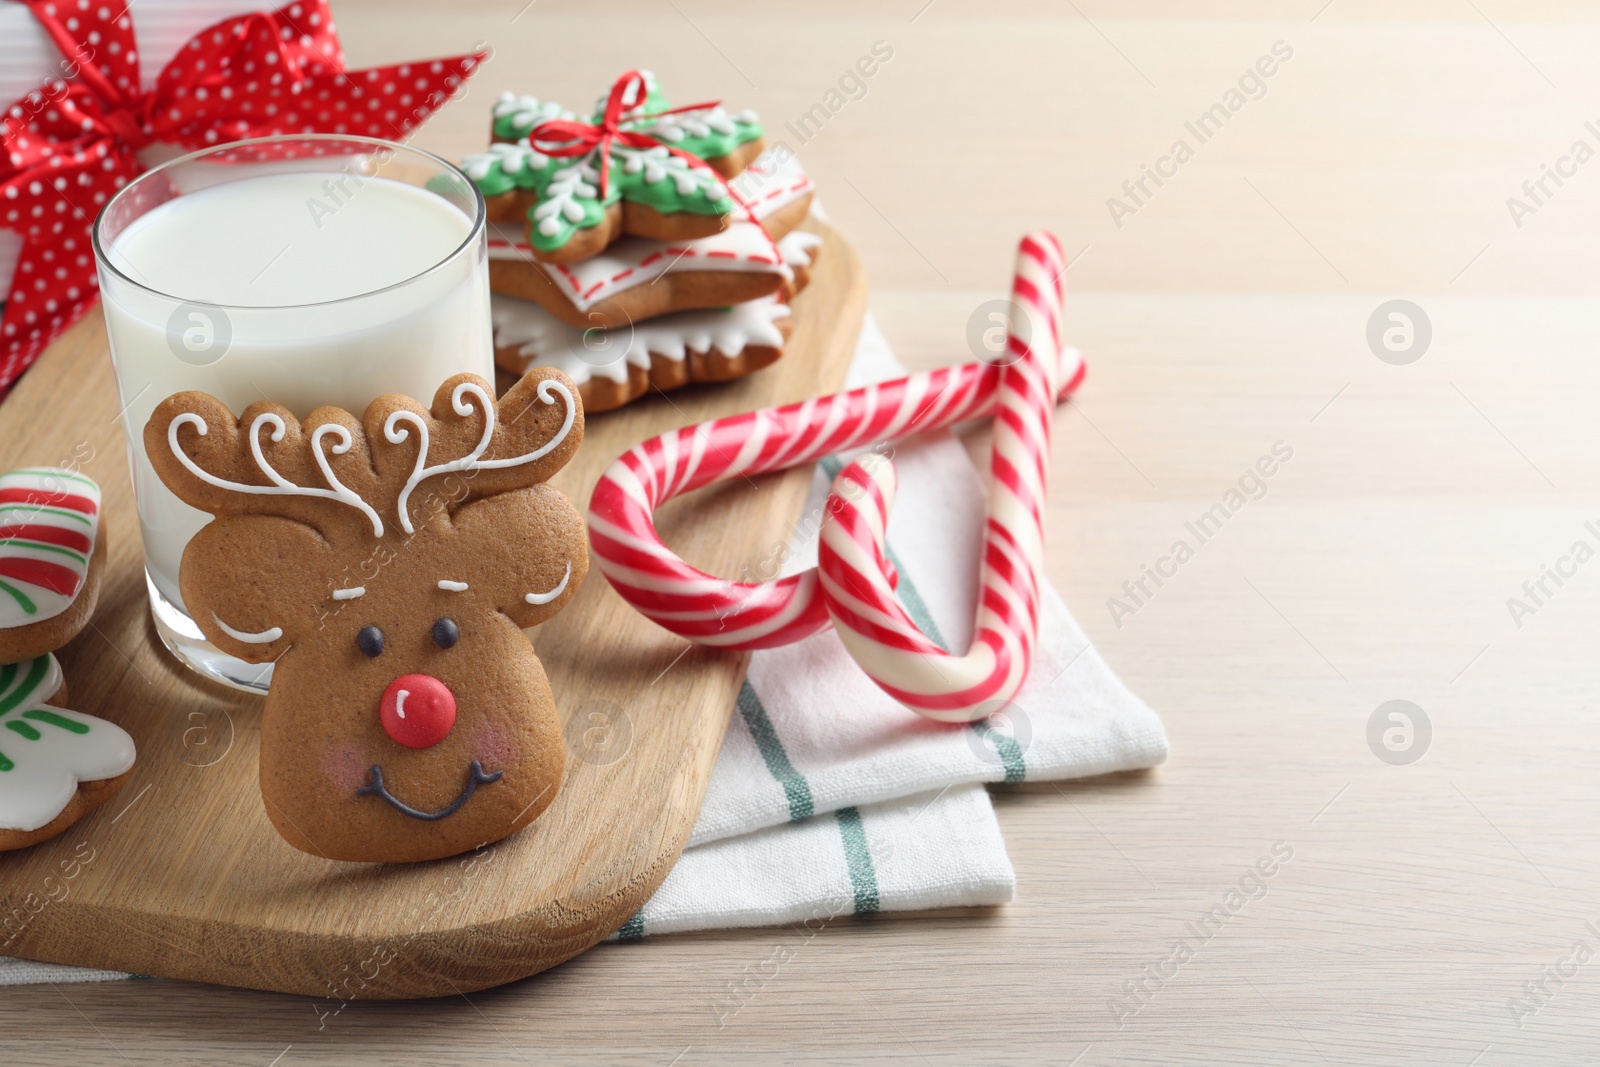 Photo of Decorated Christmas cookies and glass of milk on wooden table. Space for text